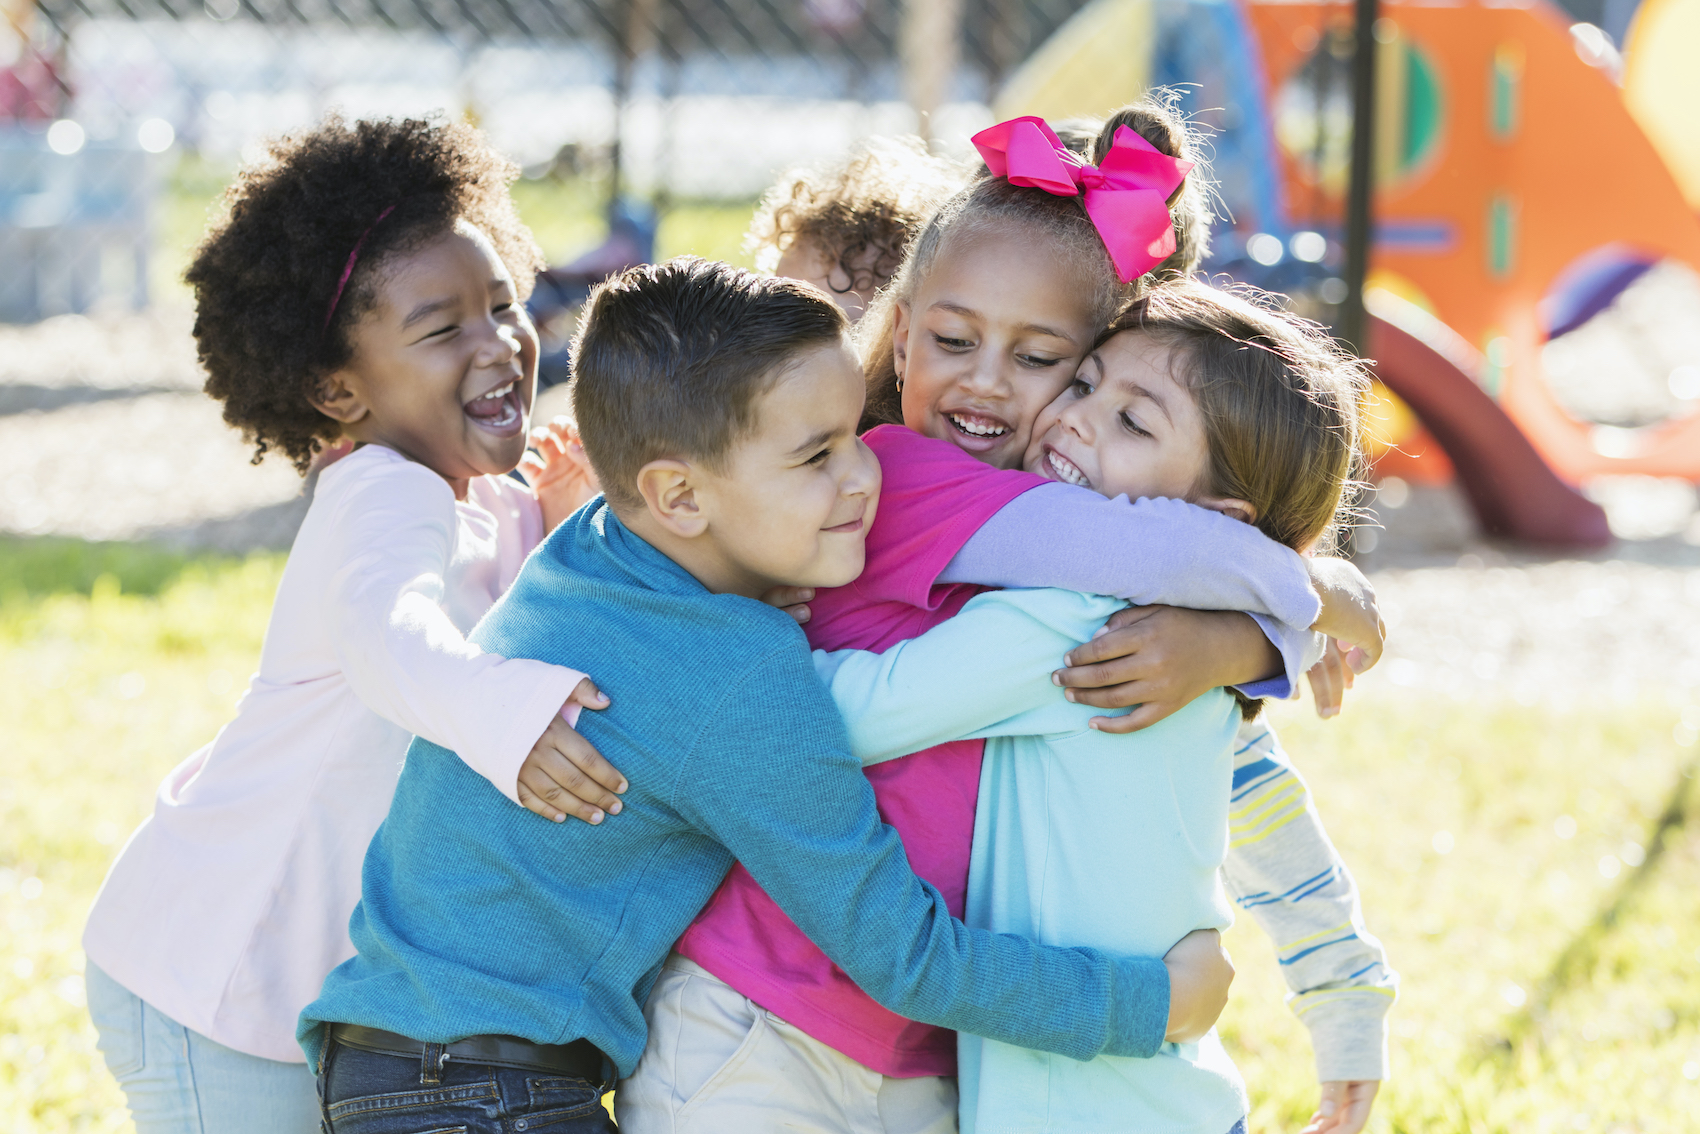 A group of preschool students hug on the playground